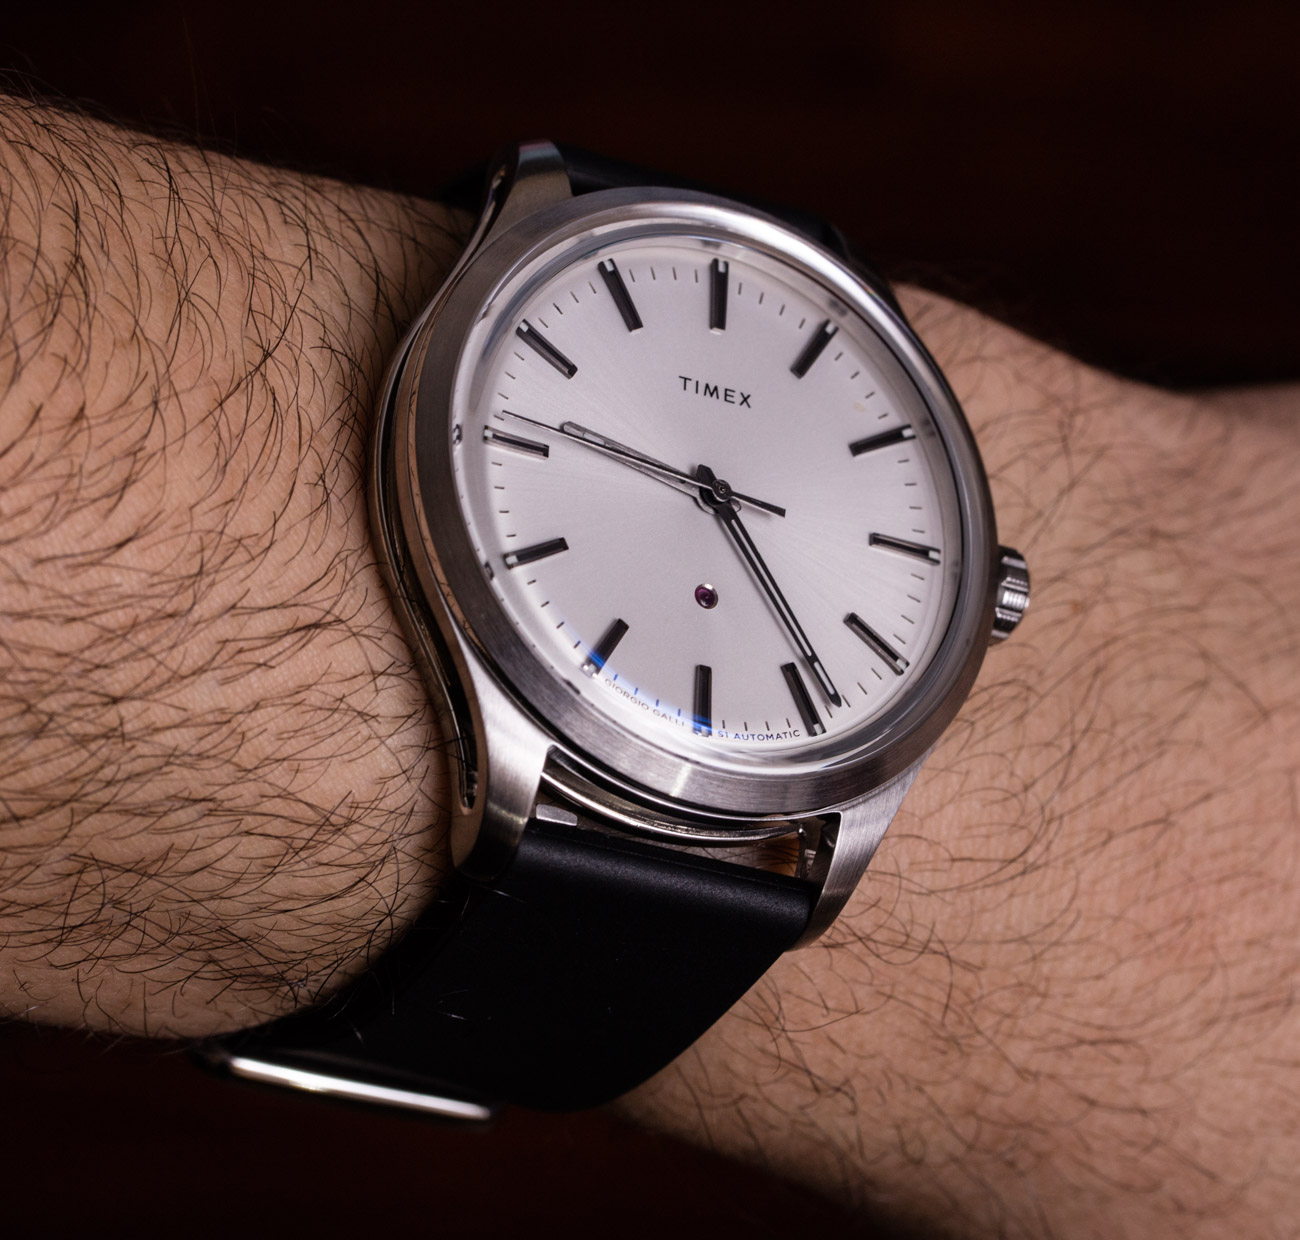 Hands-On Debut: Giorgio Galli S1 Automatic Watch By Timex | aBlogtoWatch